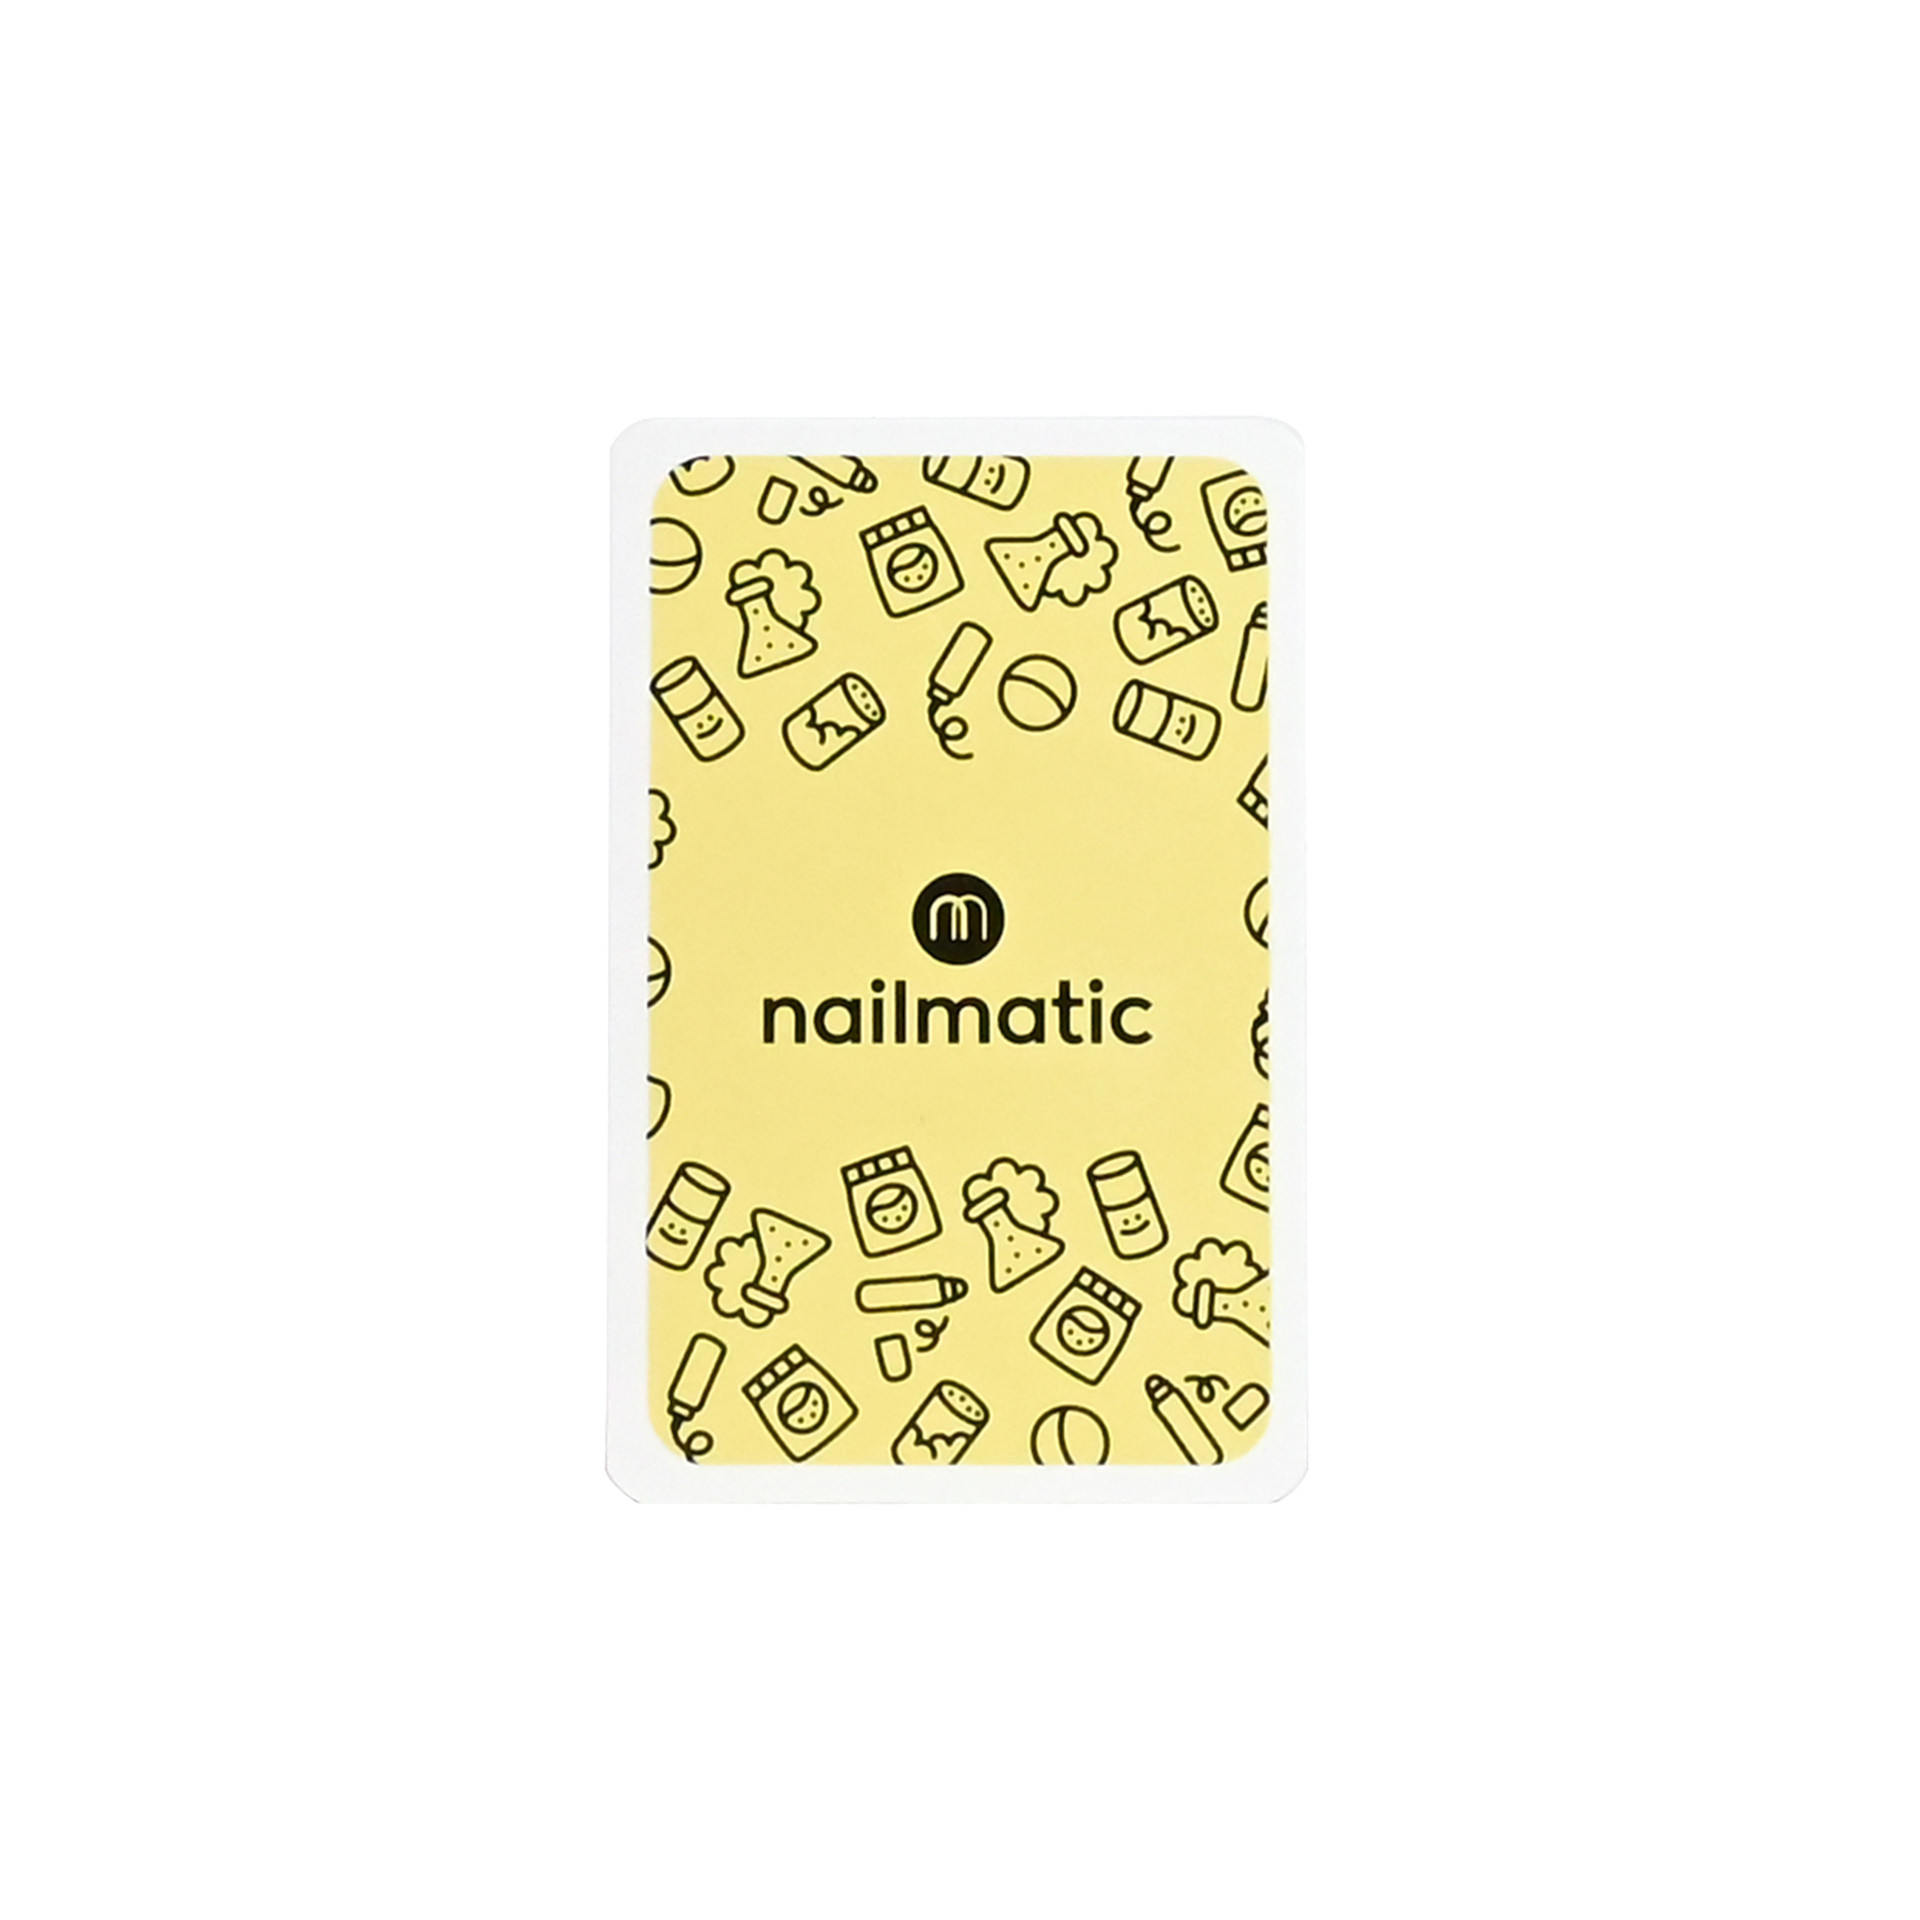 Card game 7 families nailmatic